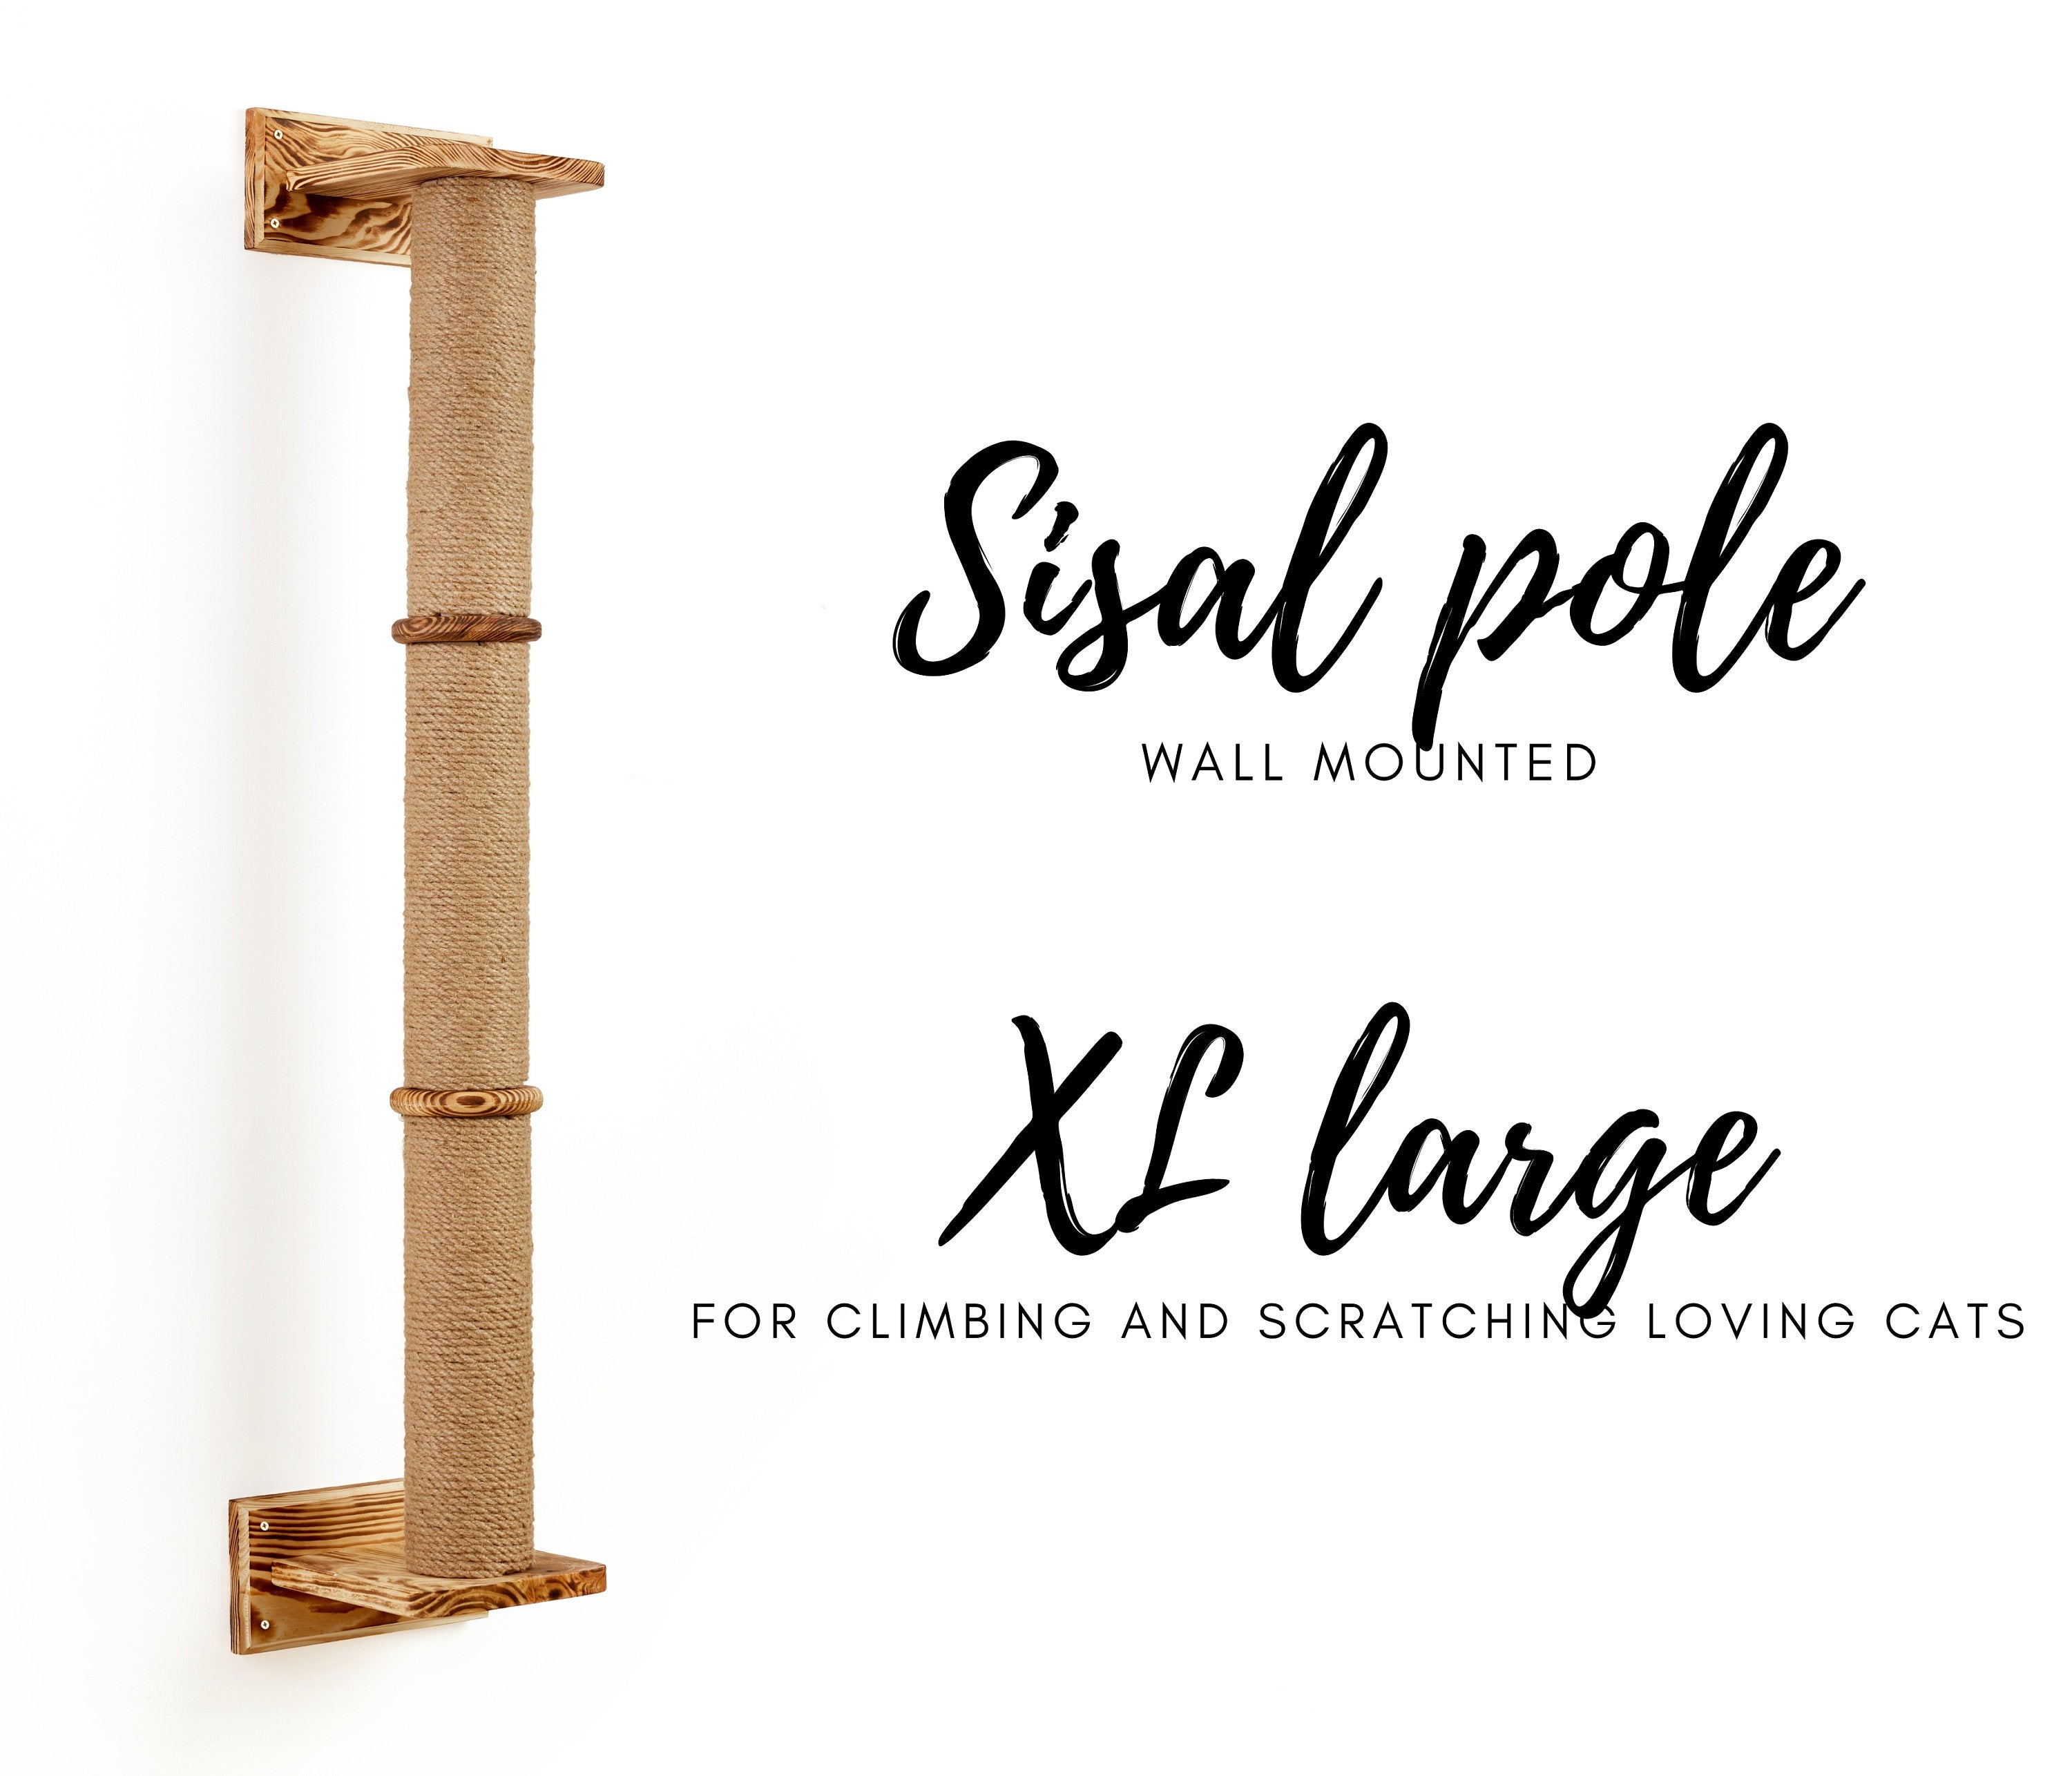 Large Wall Mounted Cat Sisal Pole - Wooden 3-tier Cat Sisal Climbing Pole - Perfect Addition For Cat Shelves And Other Cat Indoor Furniture